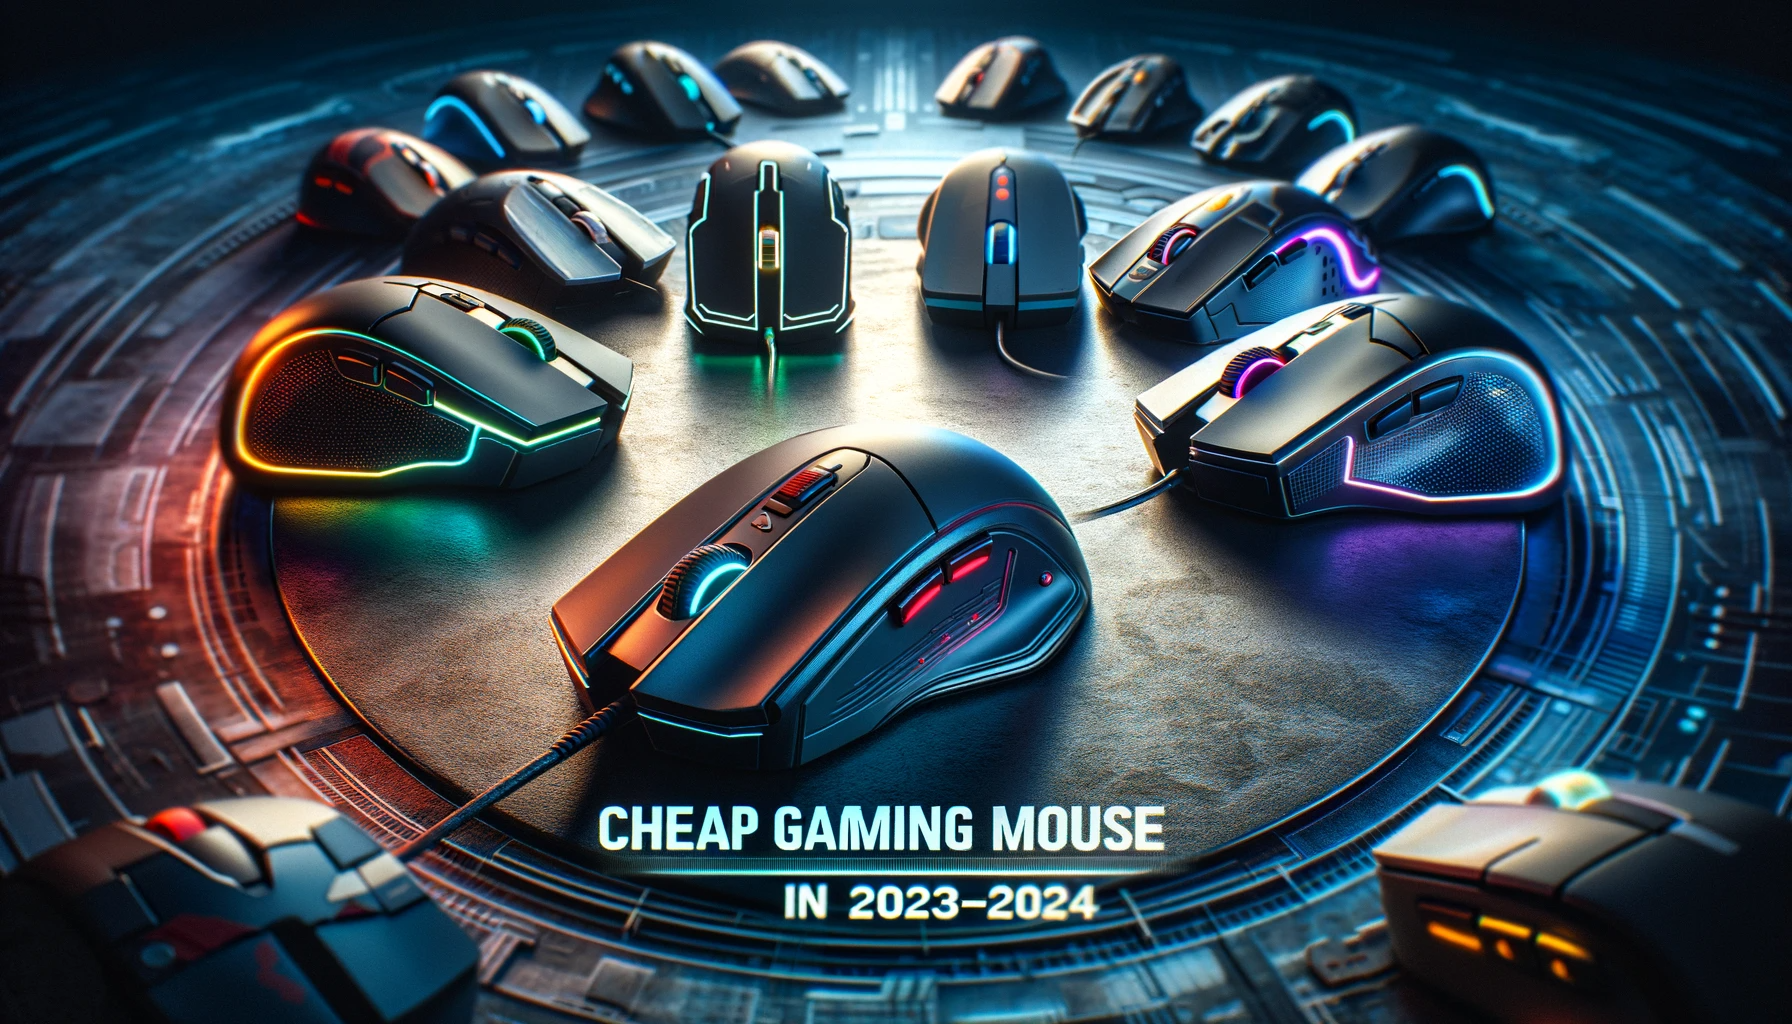 Cheap Gaming Mouse In 2023-2024